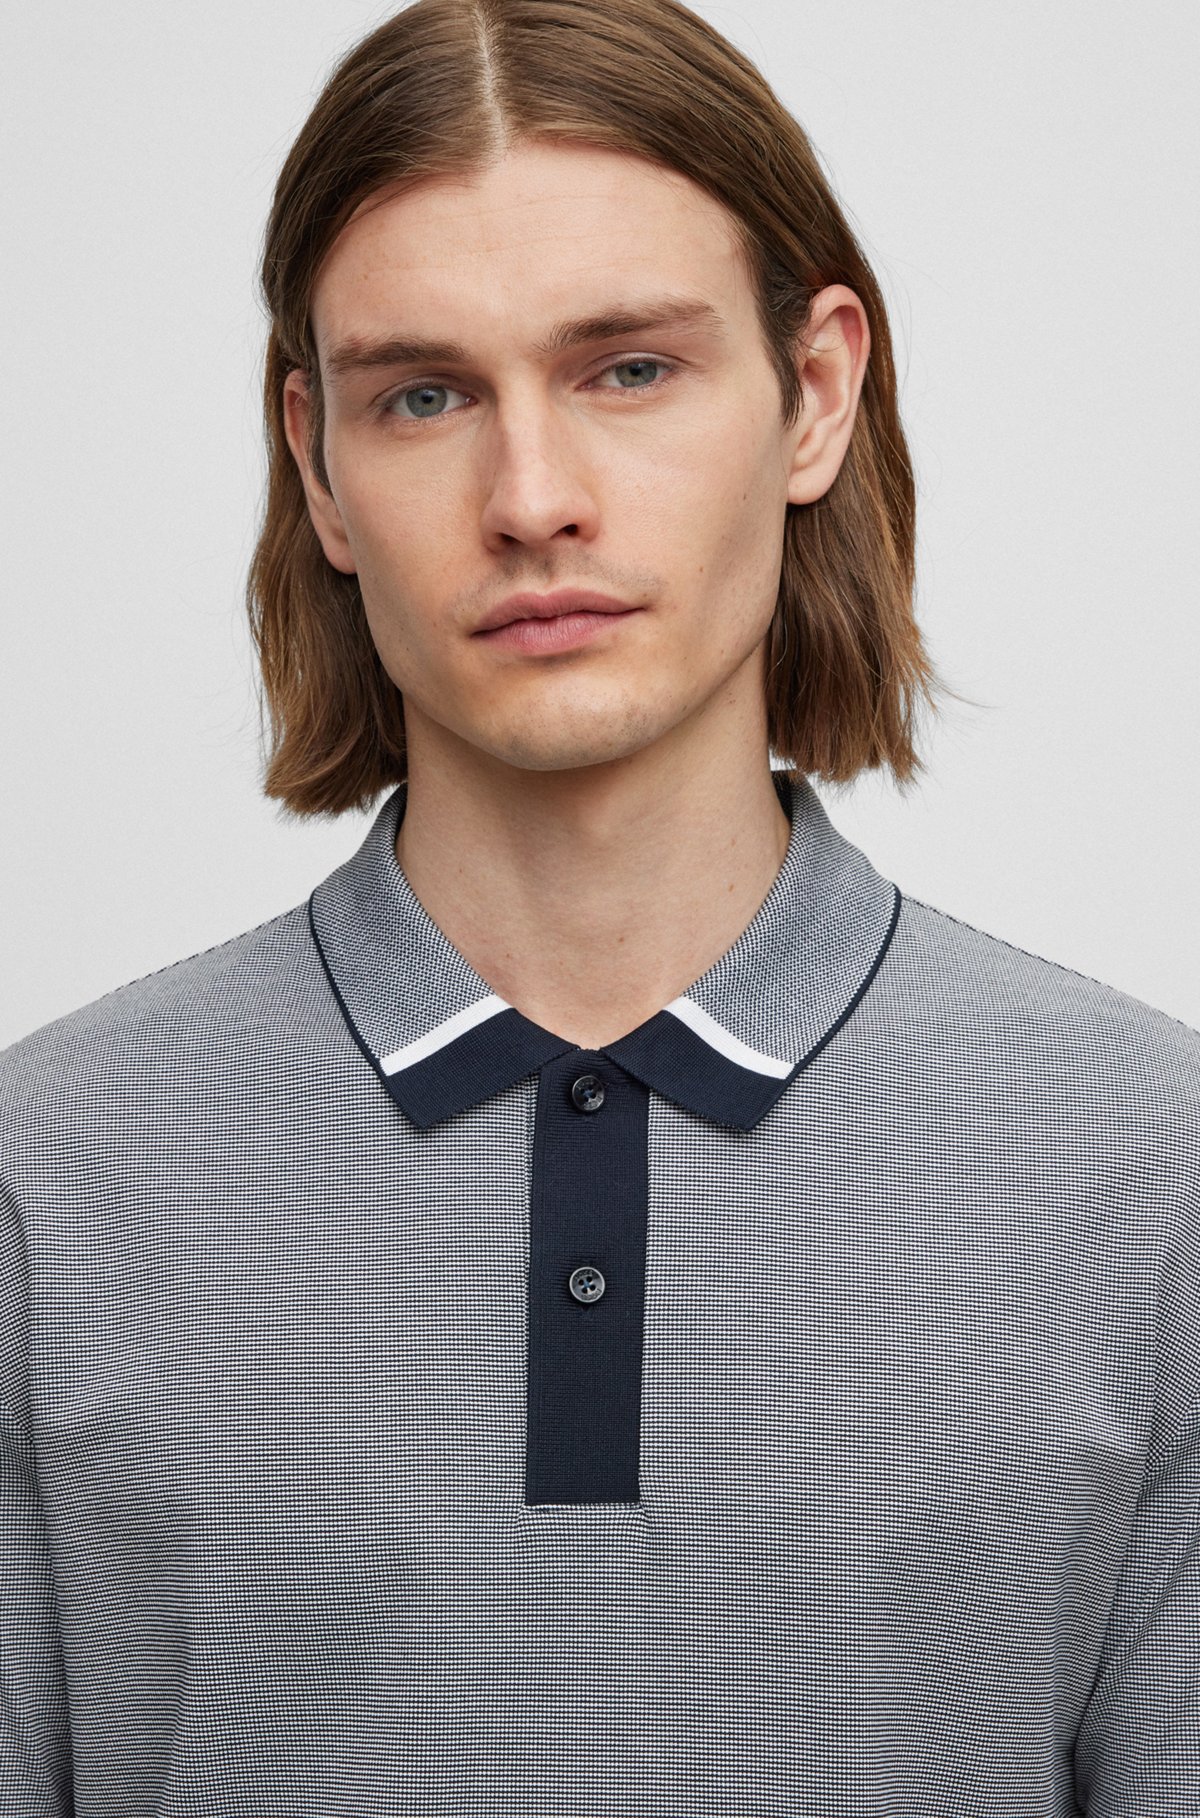 BOSS - Regular-fit polo shirt with two-tone micro pattern